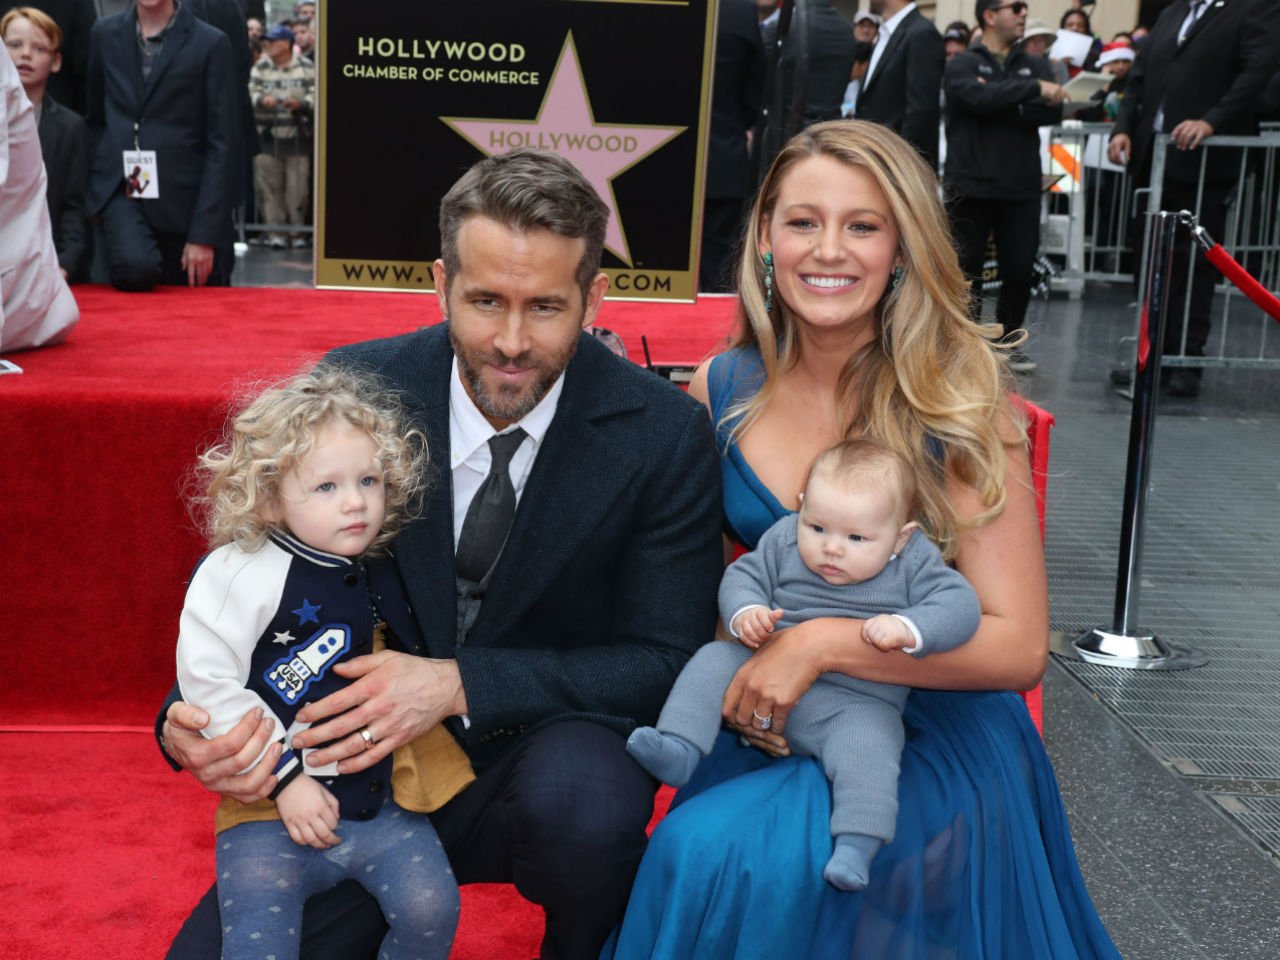 Ryan Reynolds and Blake Lively reveal their daughter's name.